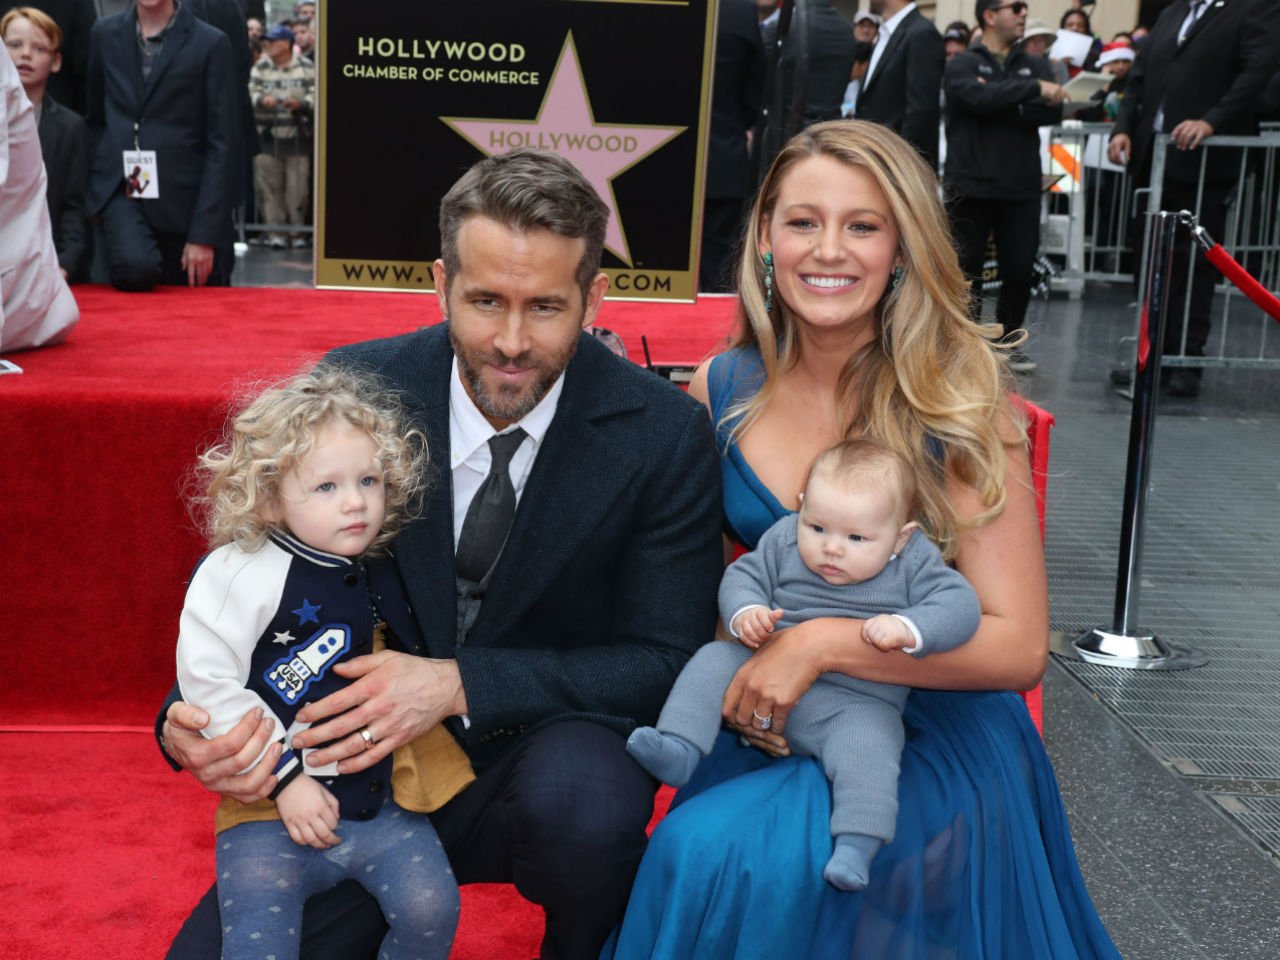 Ryan Reynolds and Blake Lively reveal their daughter's name.